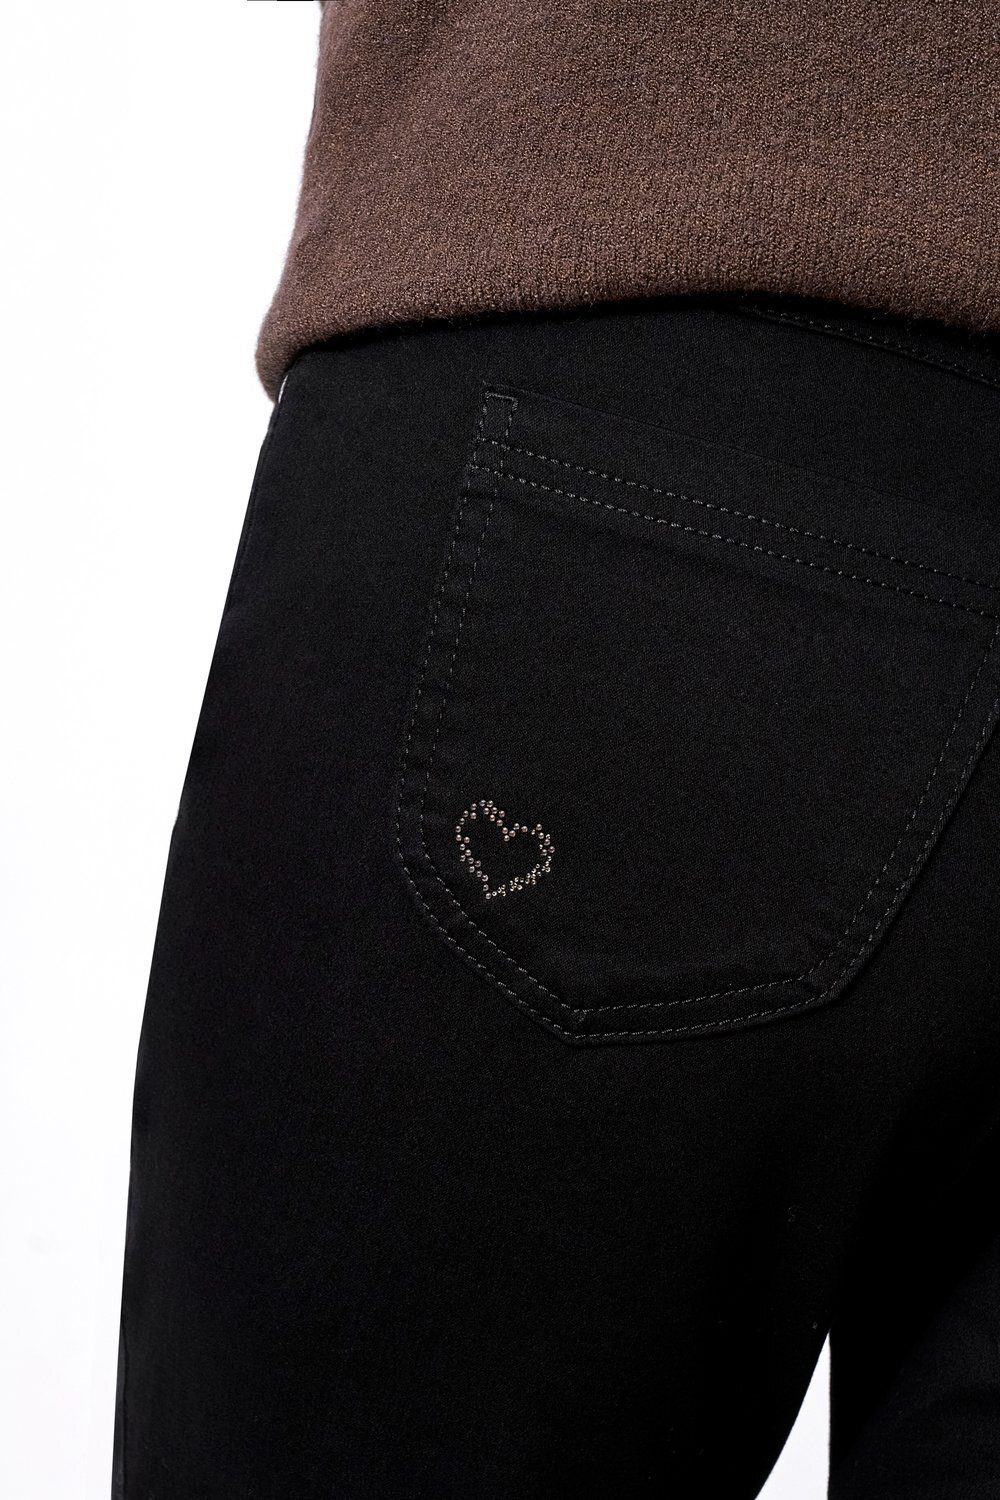 - legerer Love My by TONI 891 schwarz Passform Relaxed 5-Pocket-Hose in